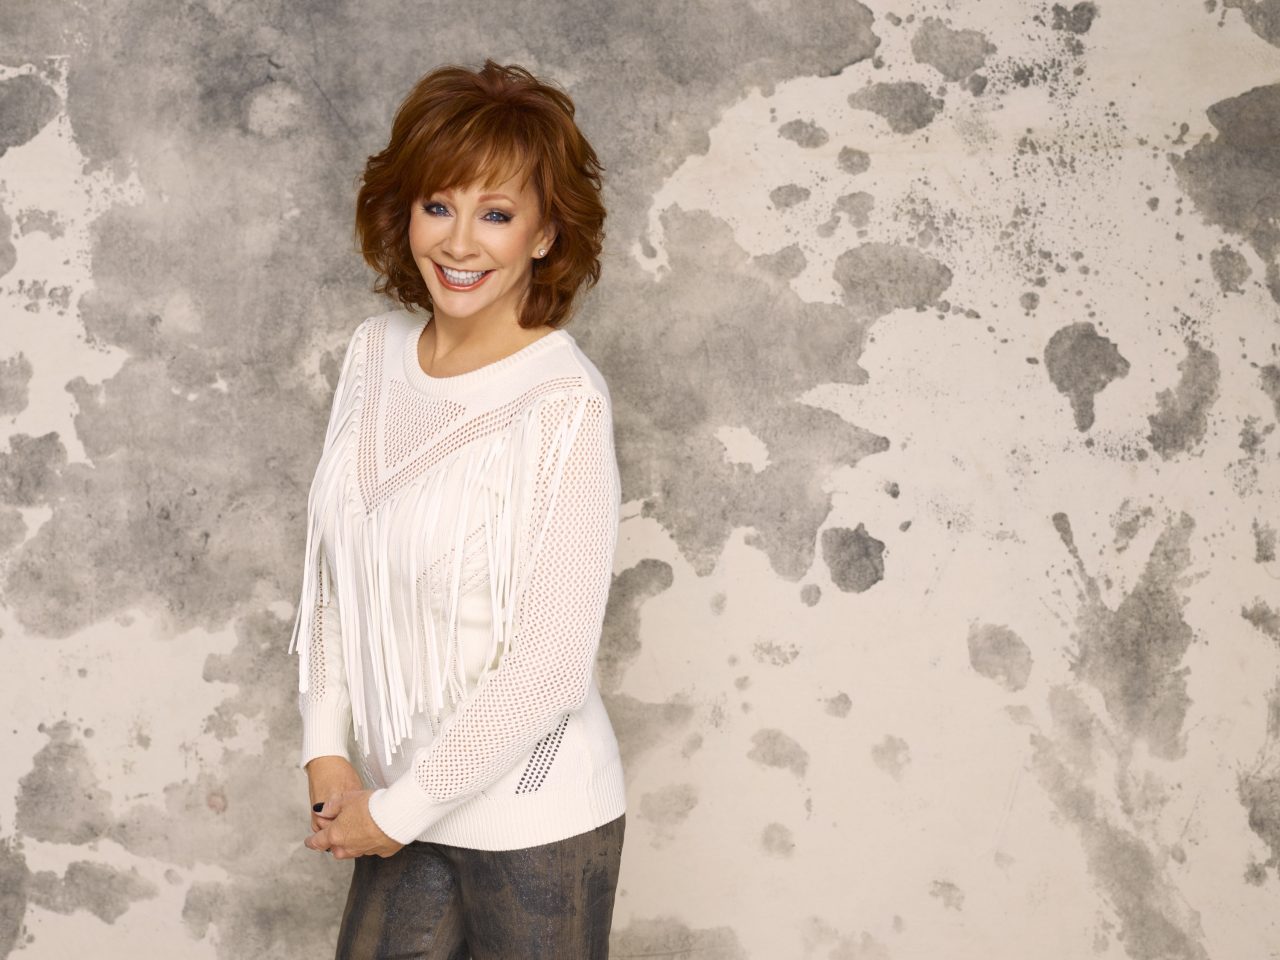 Reba McEntire to Share ‘Wit and Wisdom’ on New Spotify Podcast